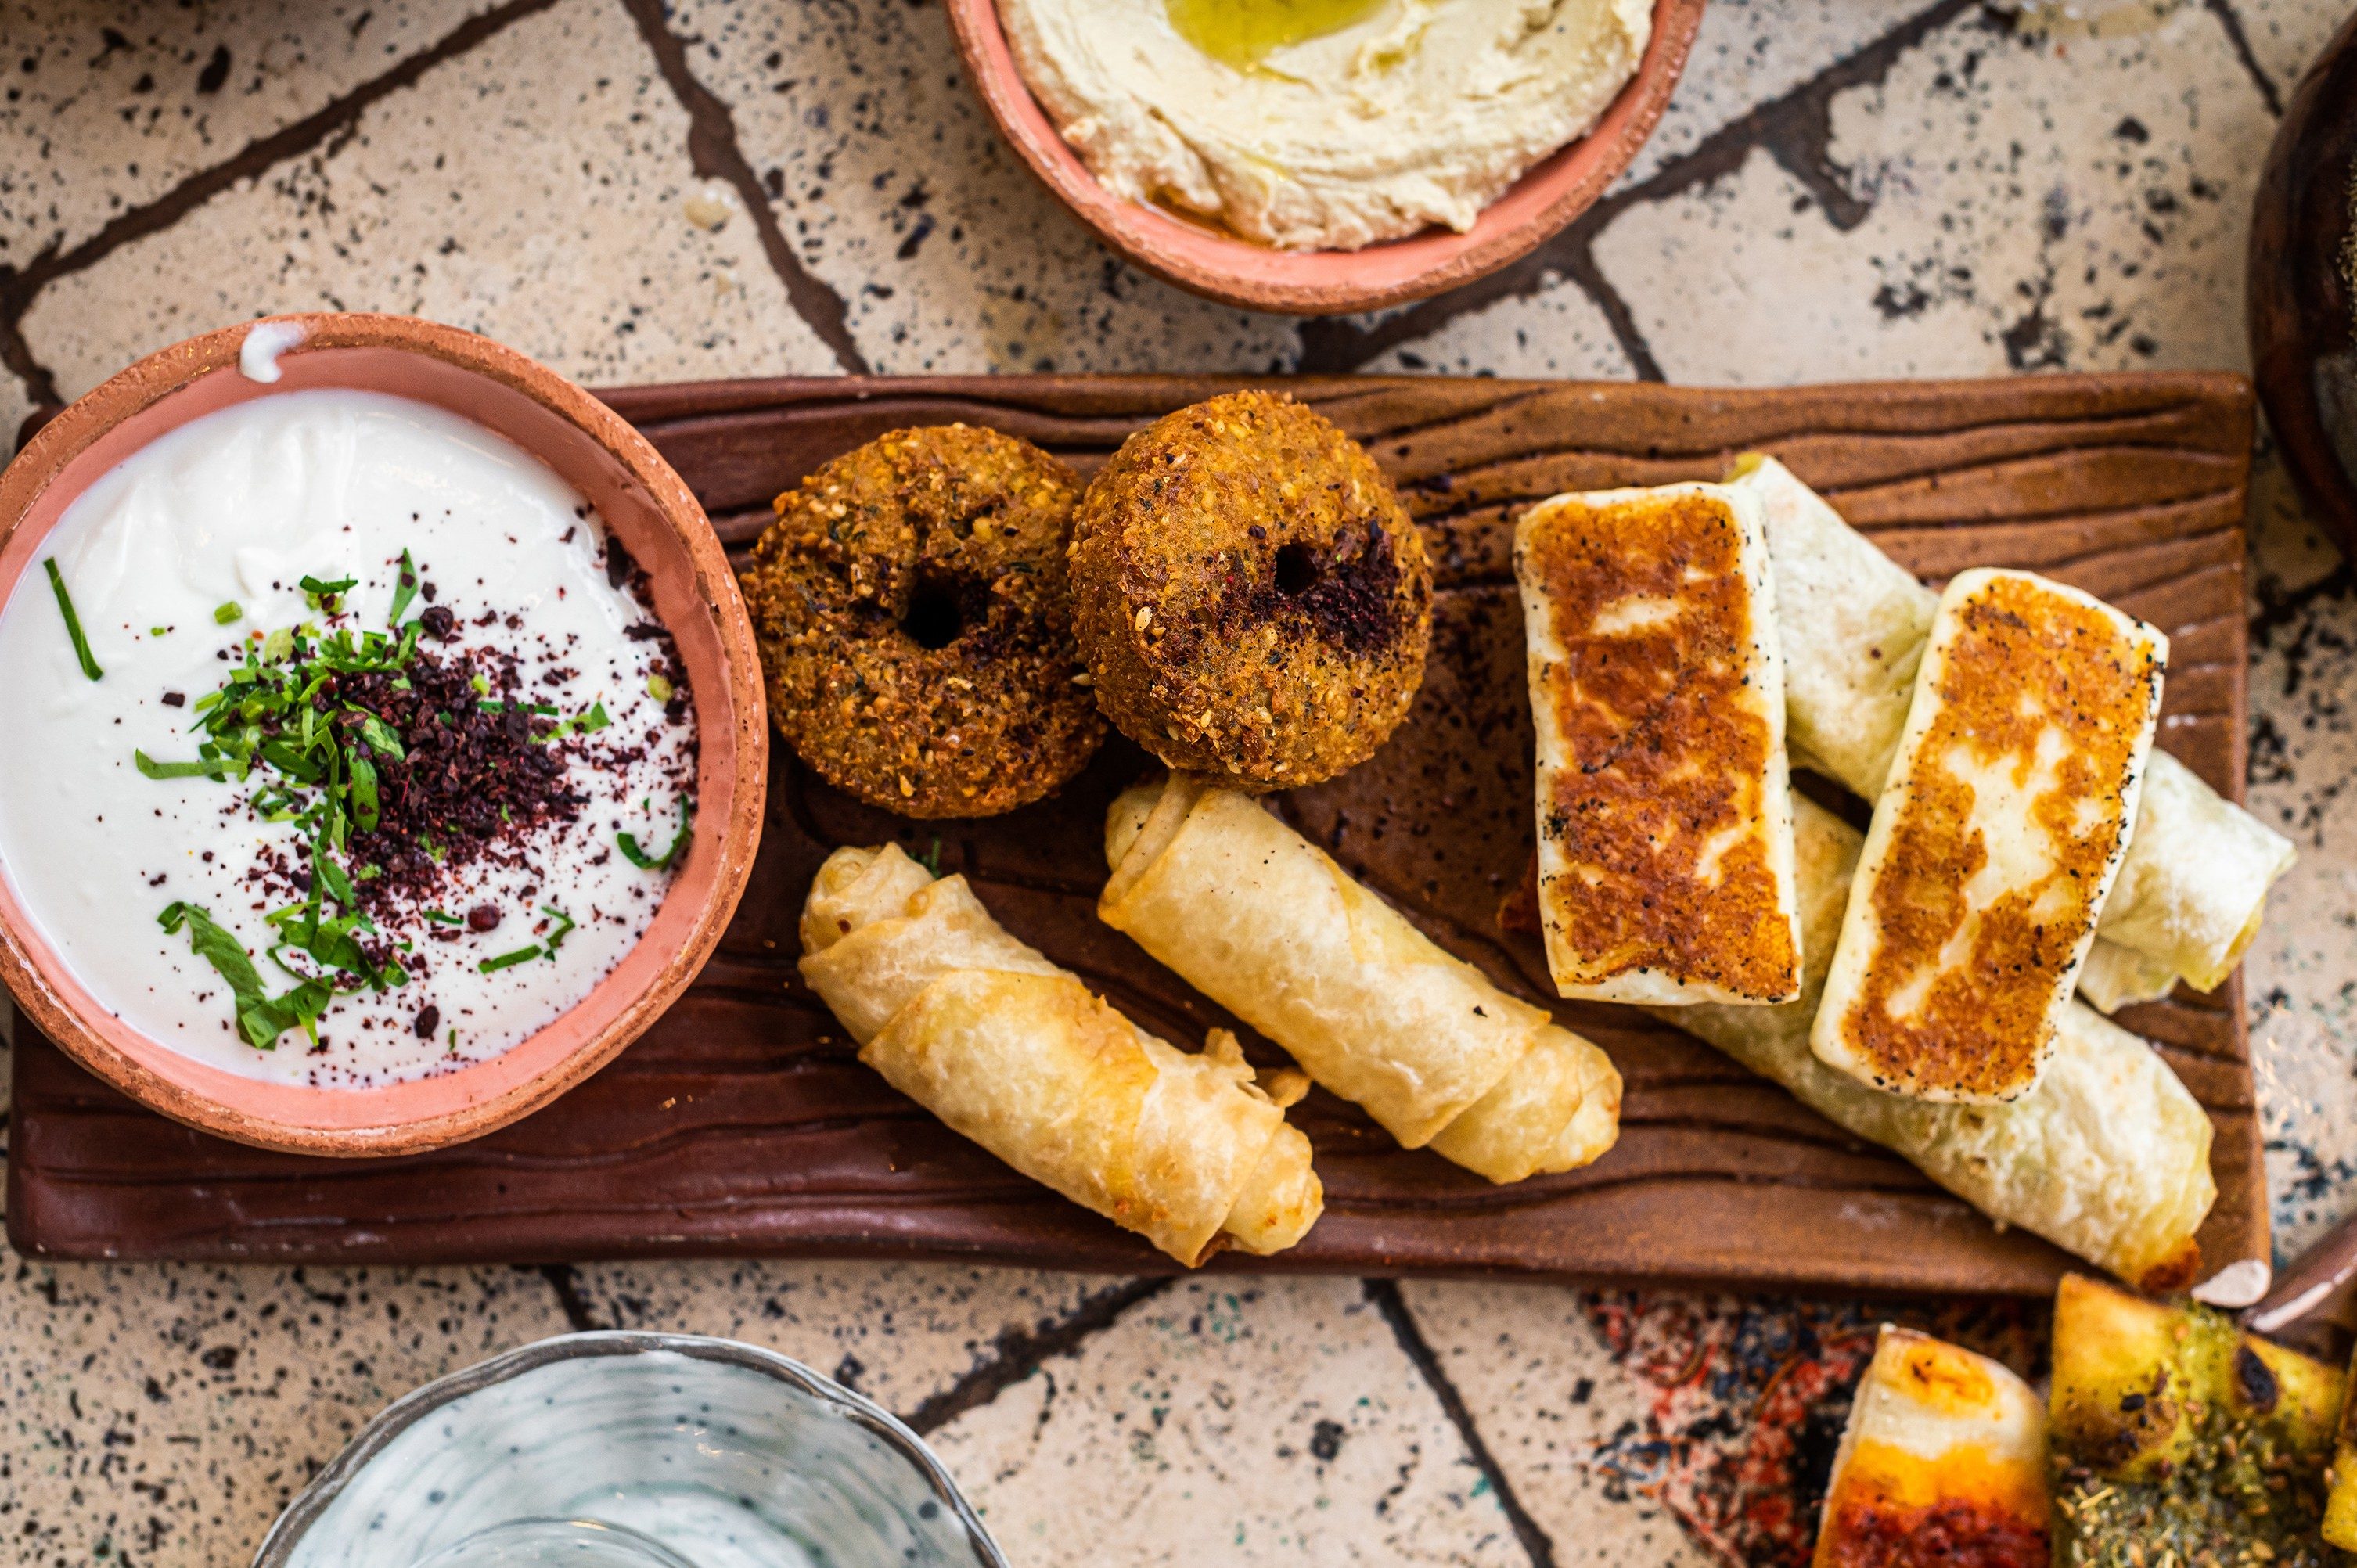 Fried cheese and falafel with sause in Turkish Village Breakfast. Top view.